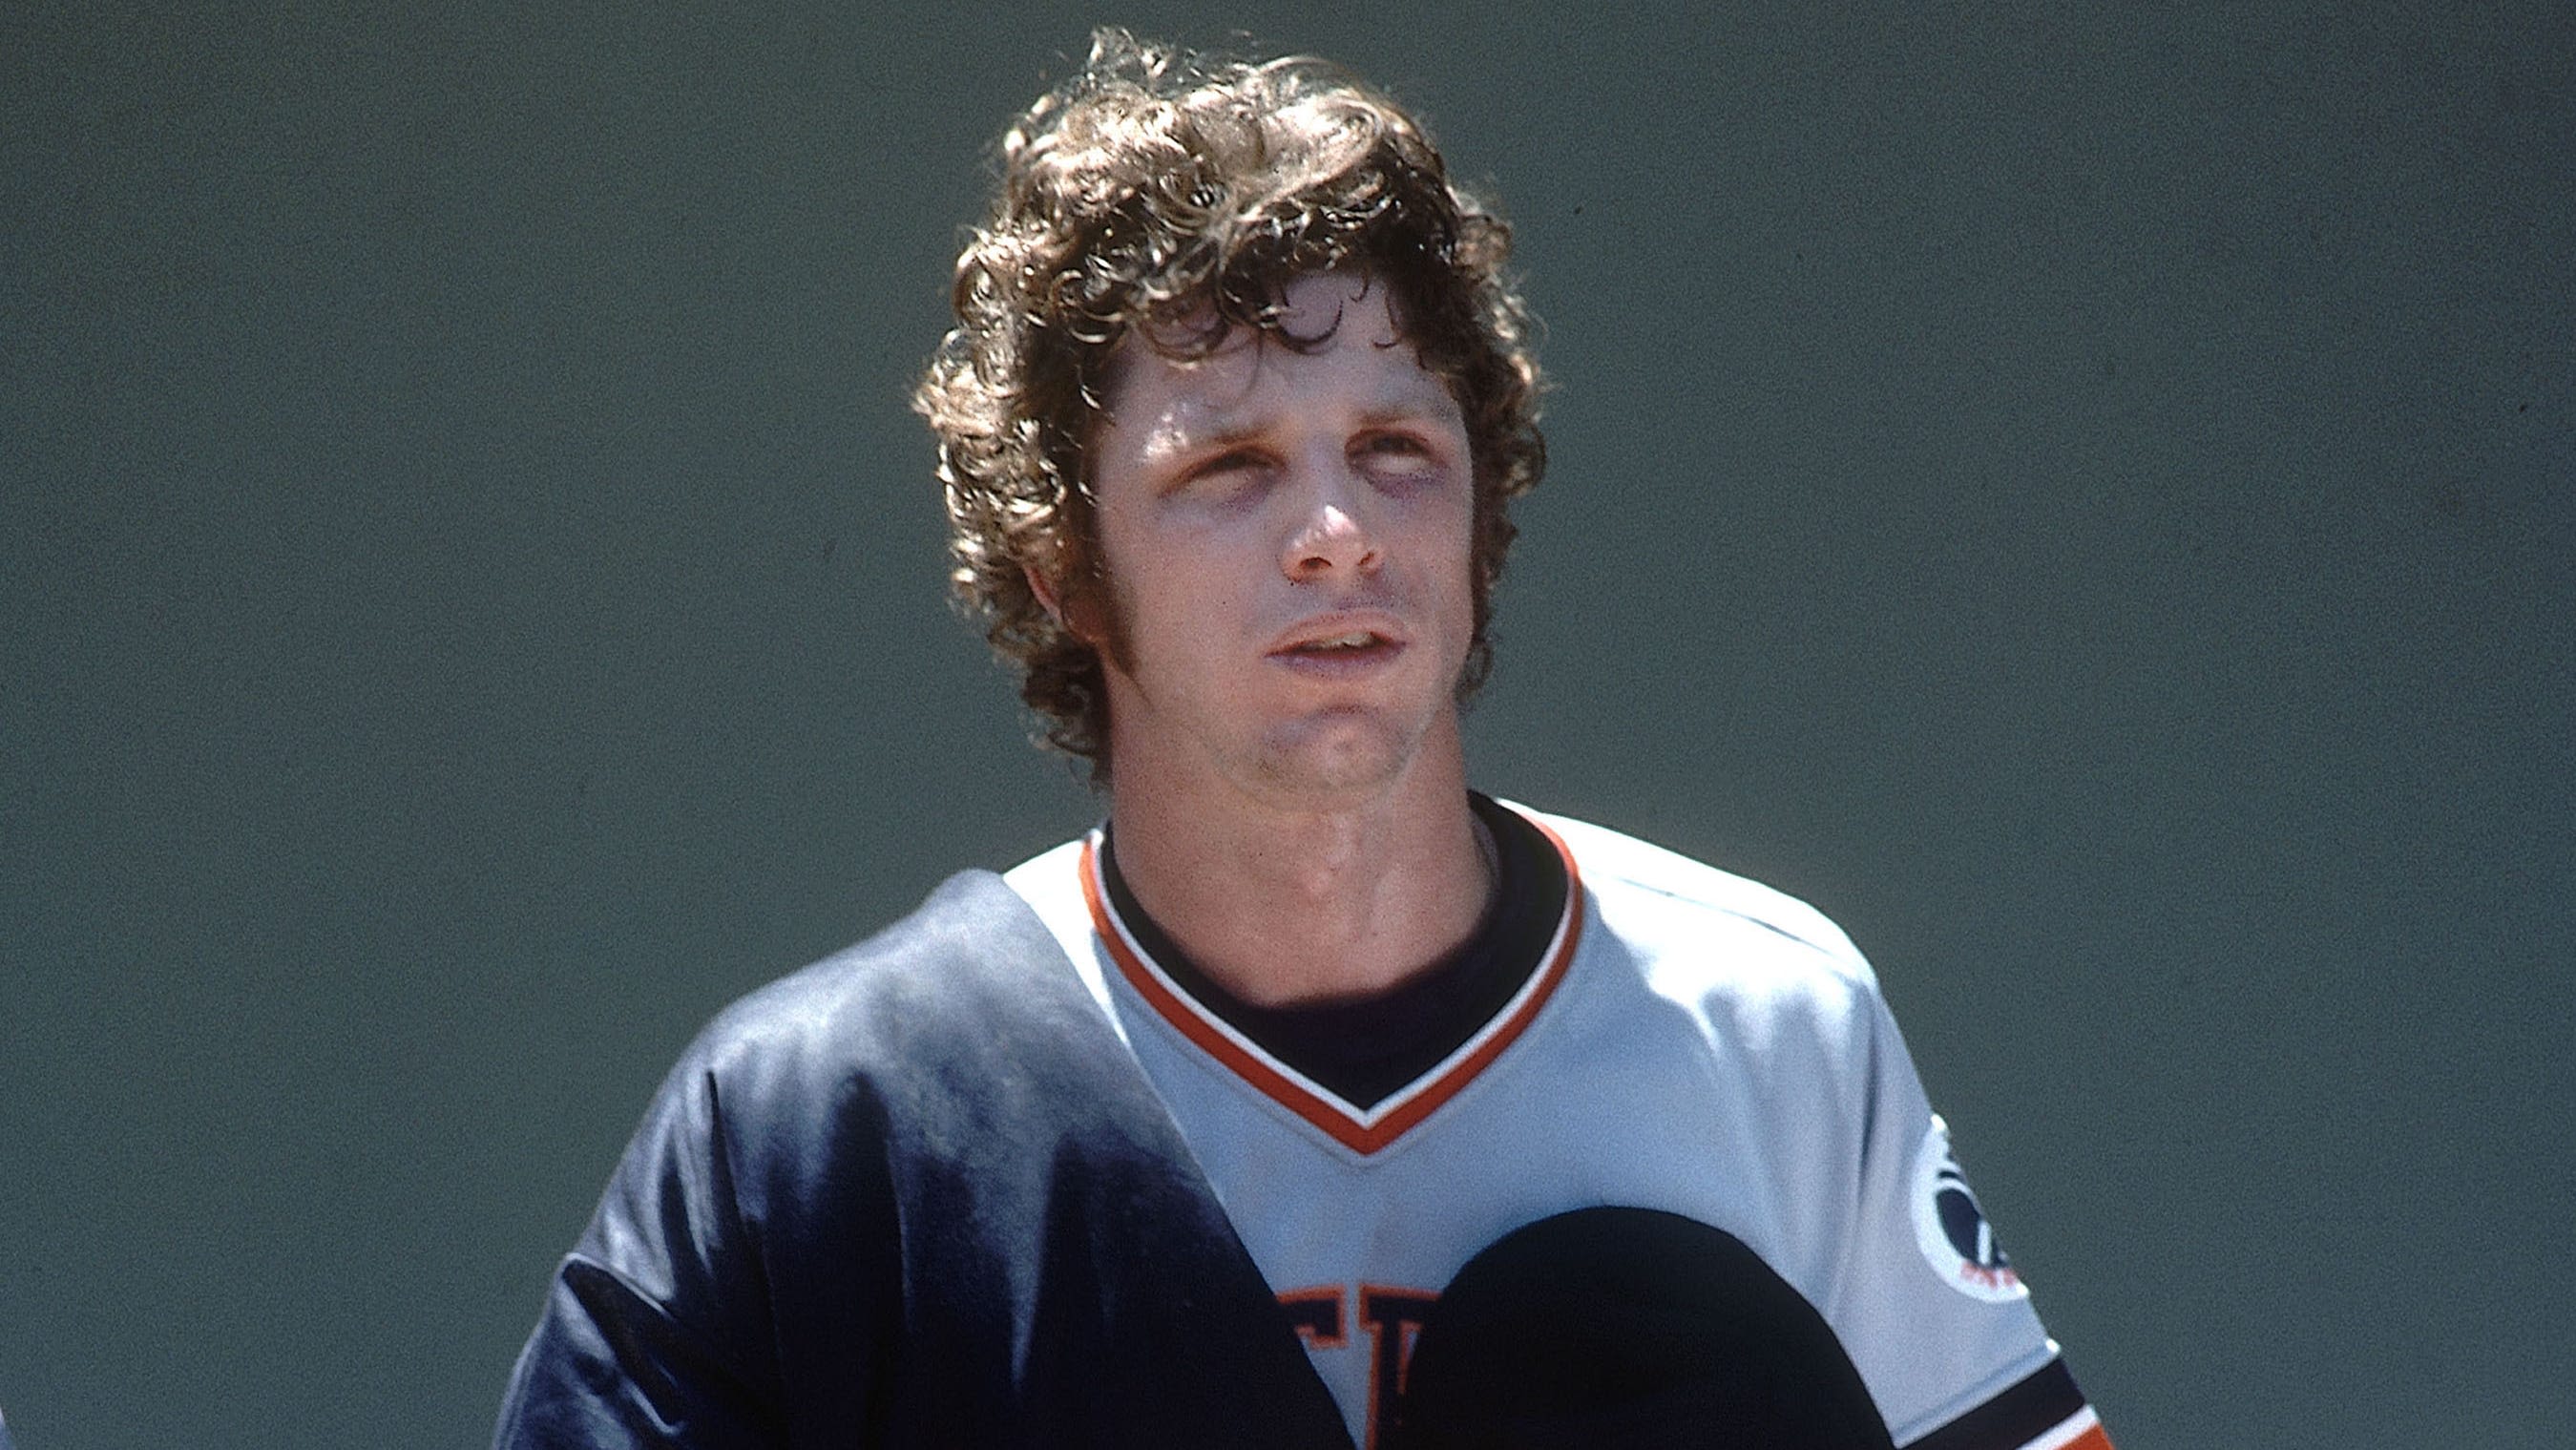 50 years ago, the Detroit Tigers drafted Mark Fidrych after a scout saw one pitch